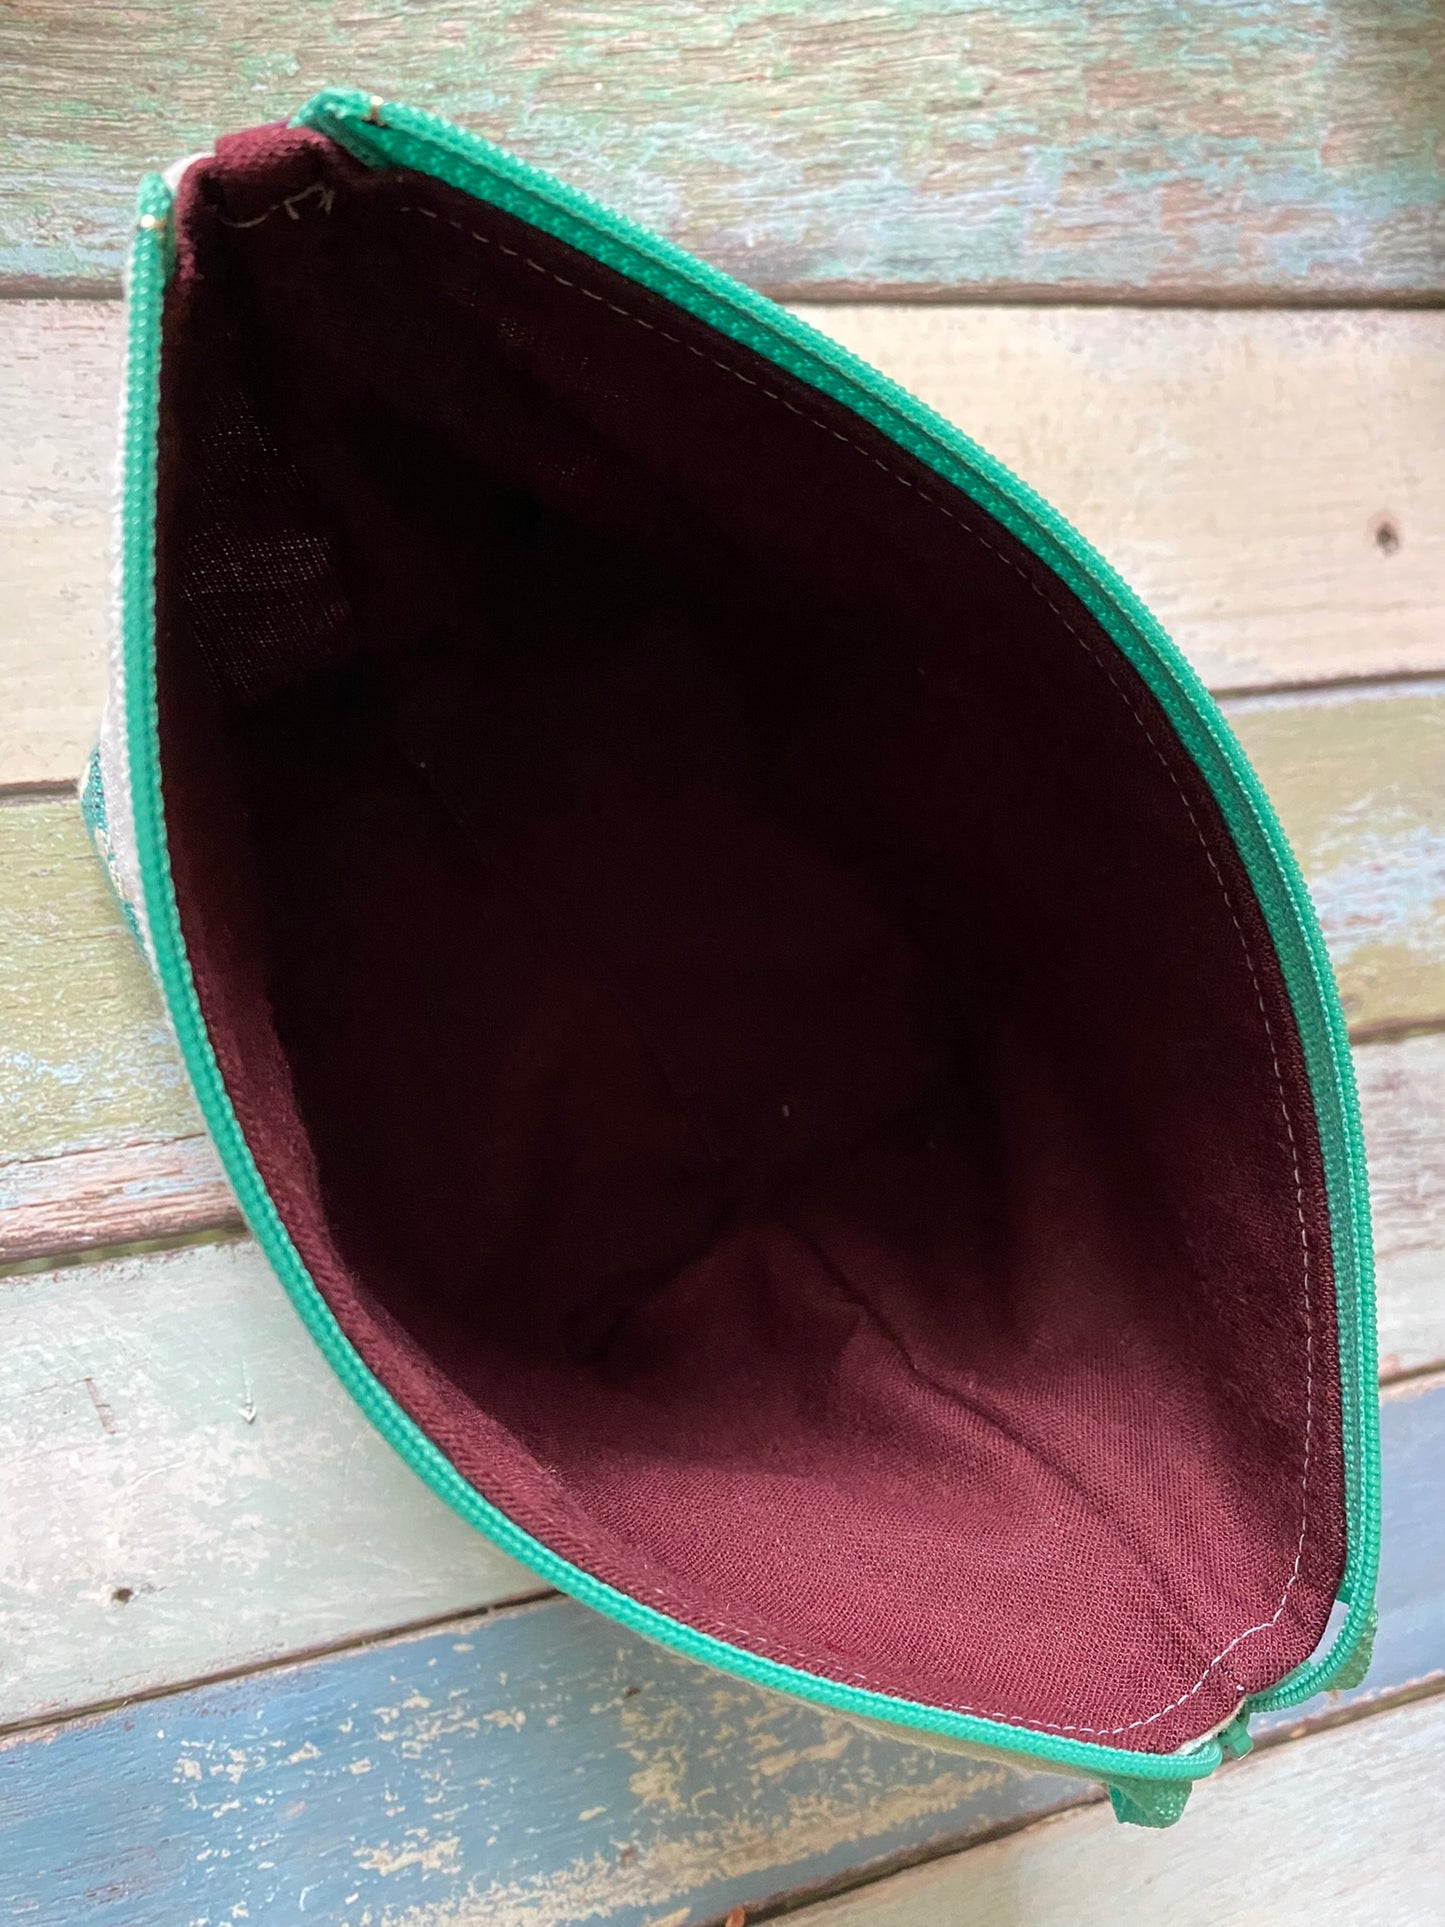 Llama Small Open Wide Spindle Bag